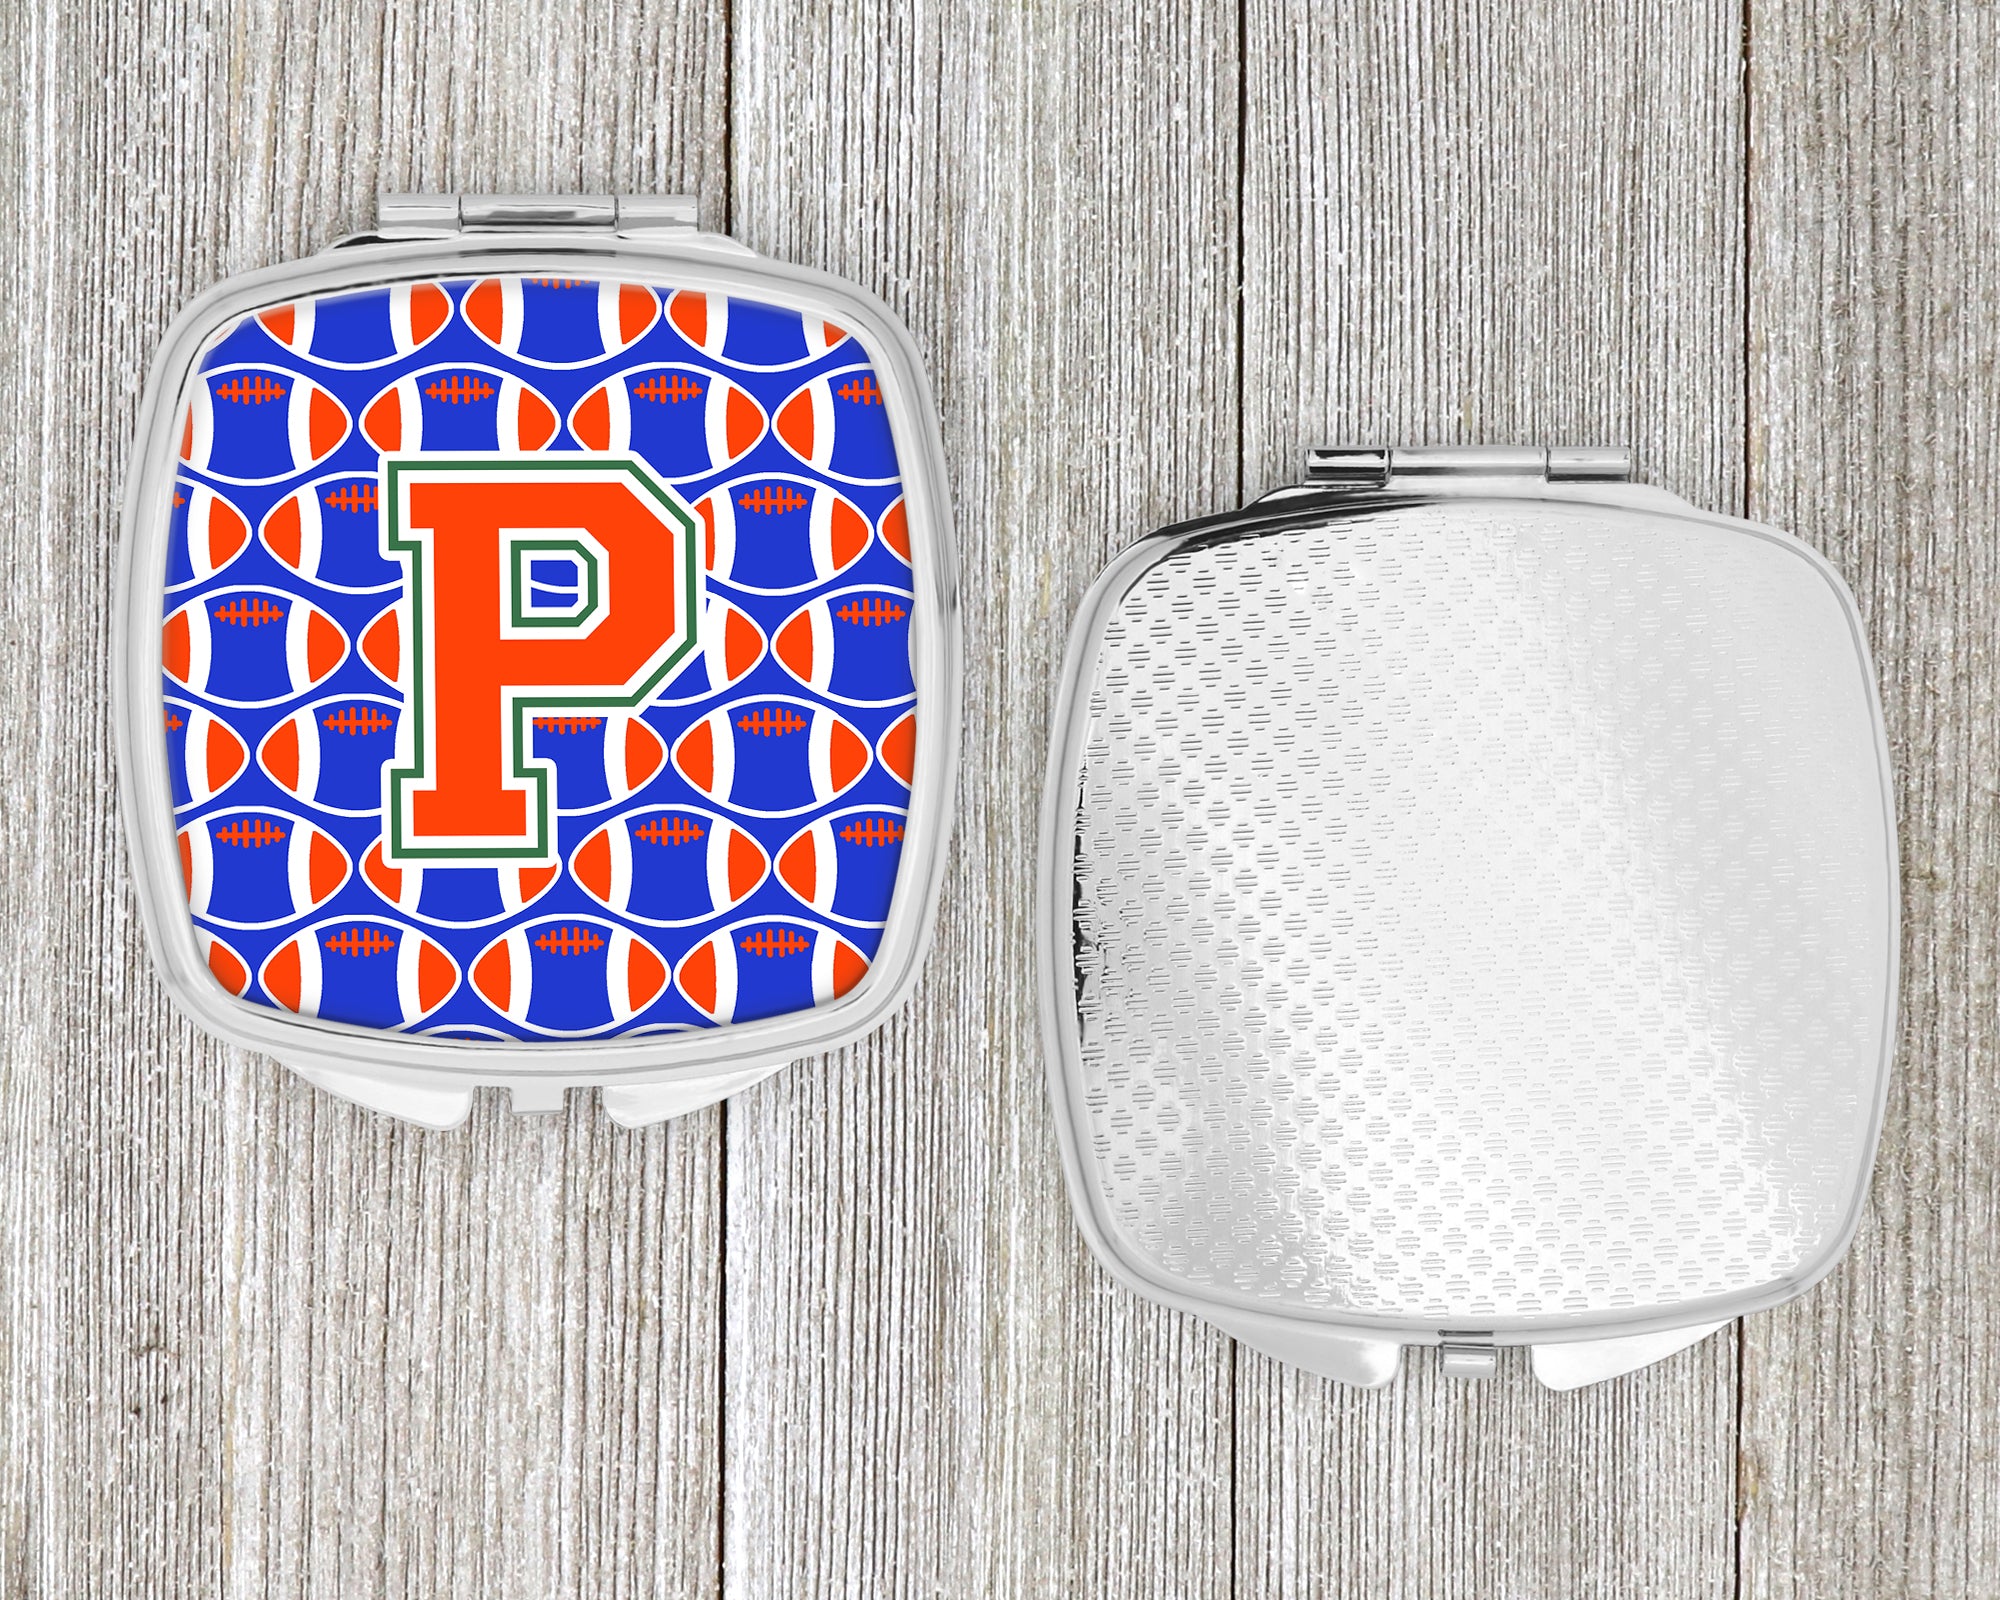 Letter P Football Green, Blue and Orange Compact Mirror CJ1083-PSCM  the-store.com.